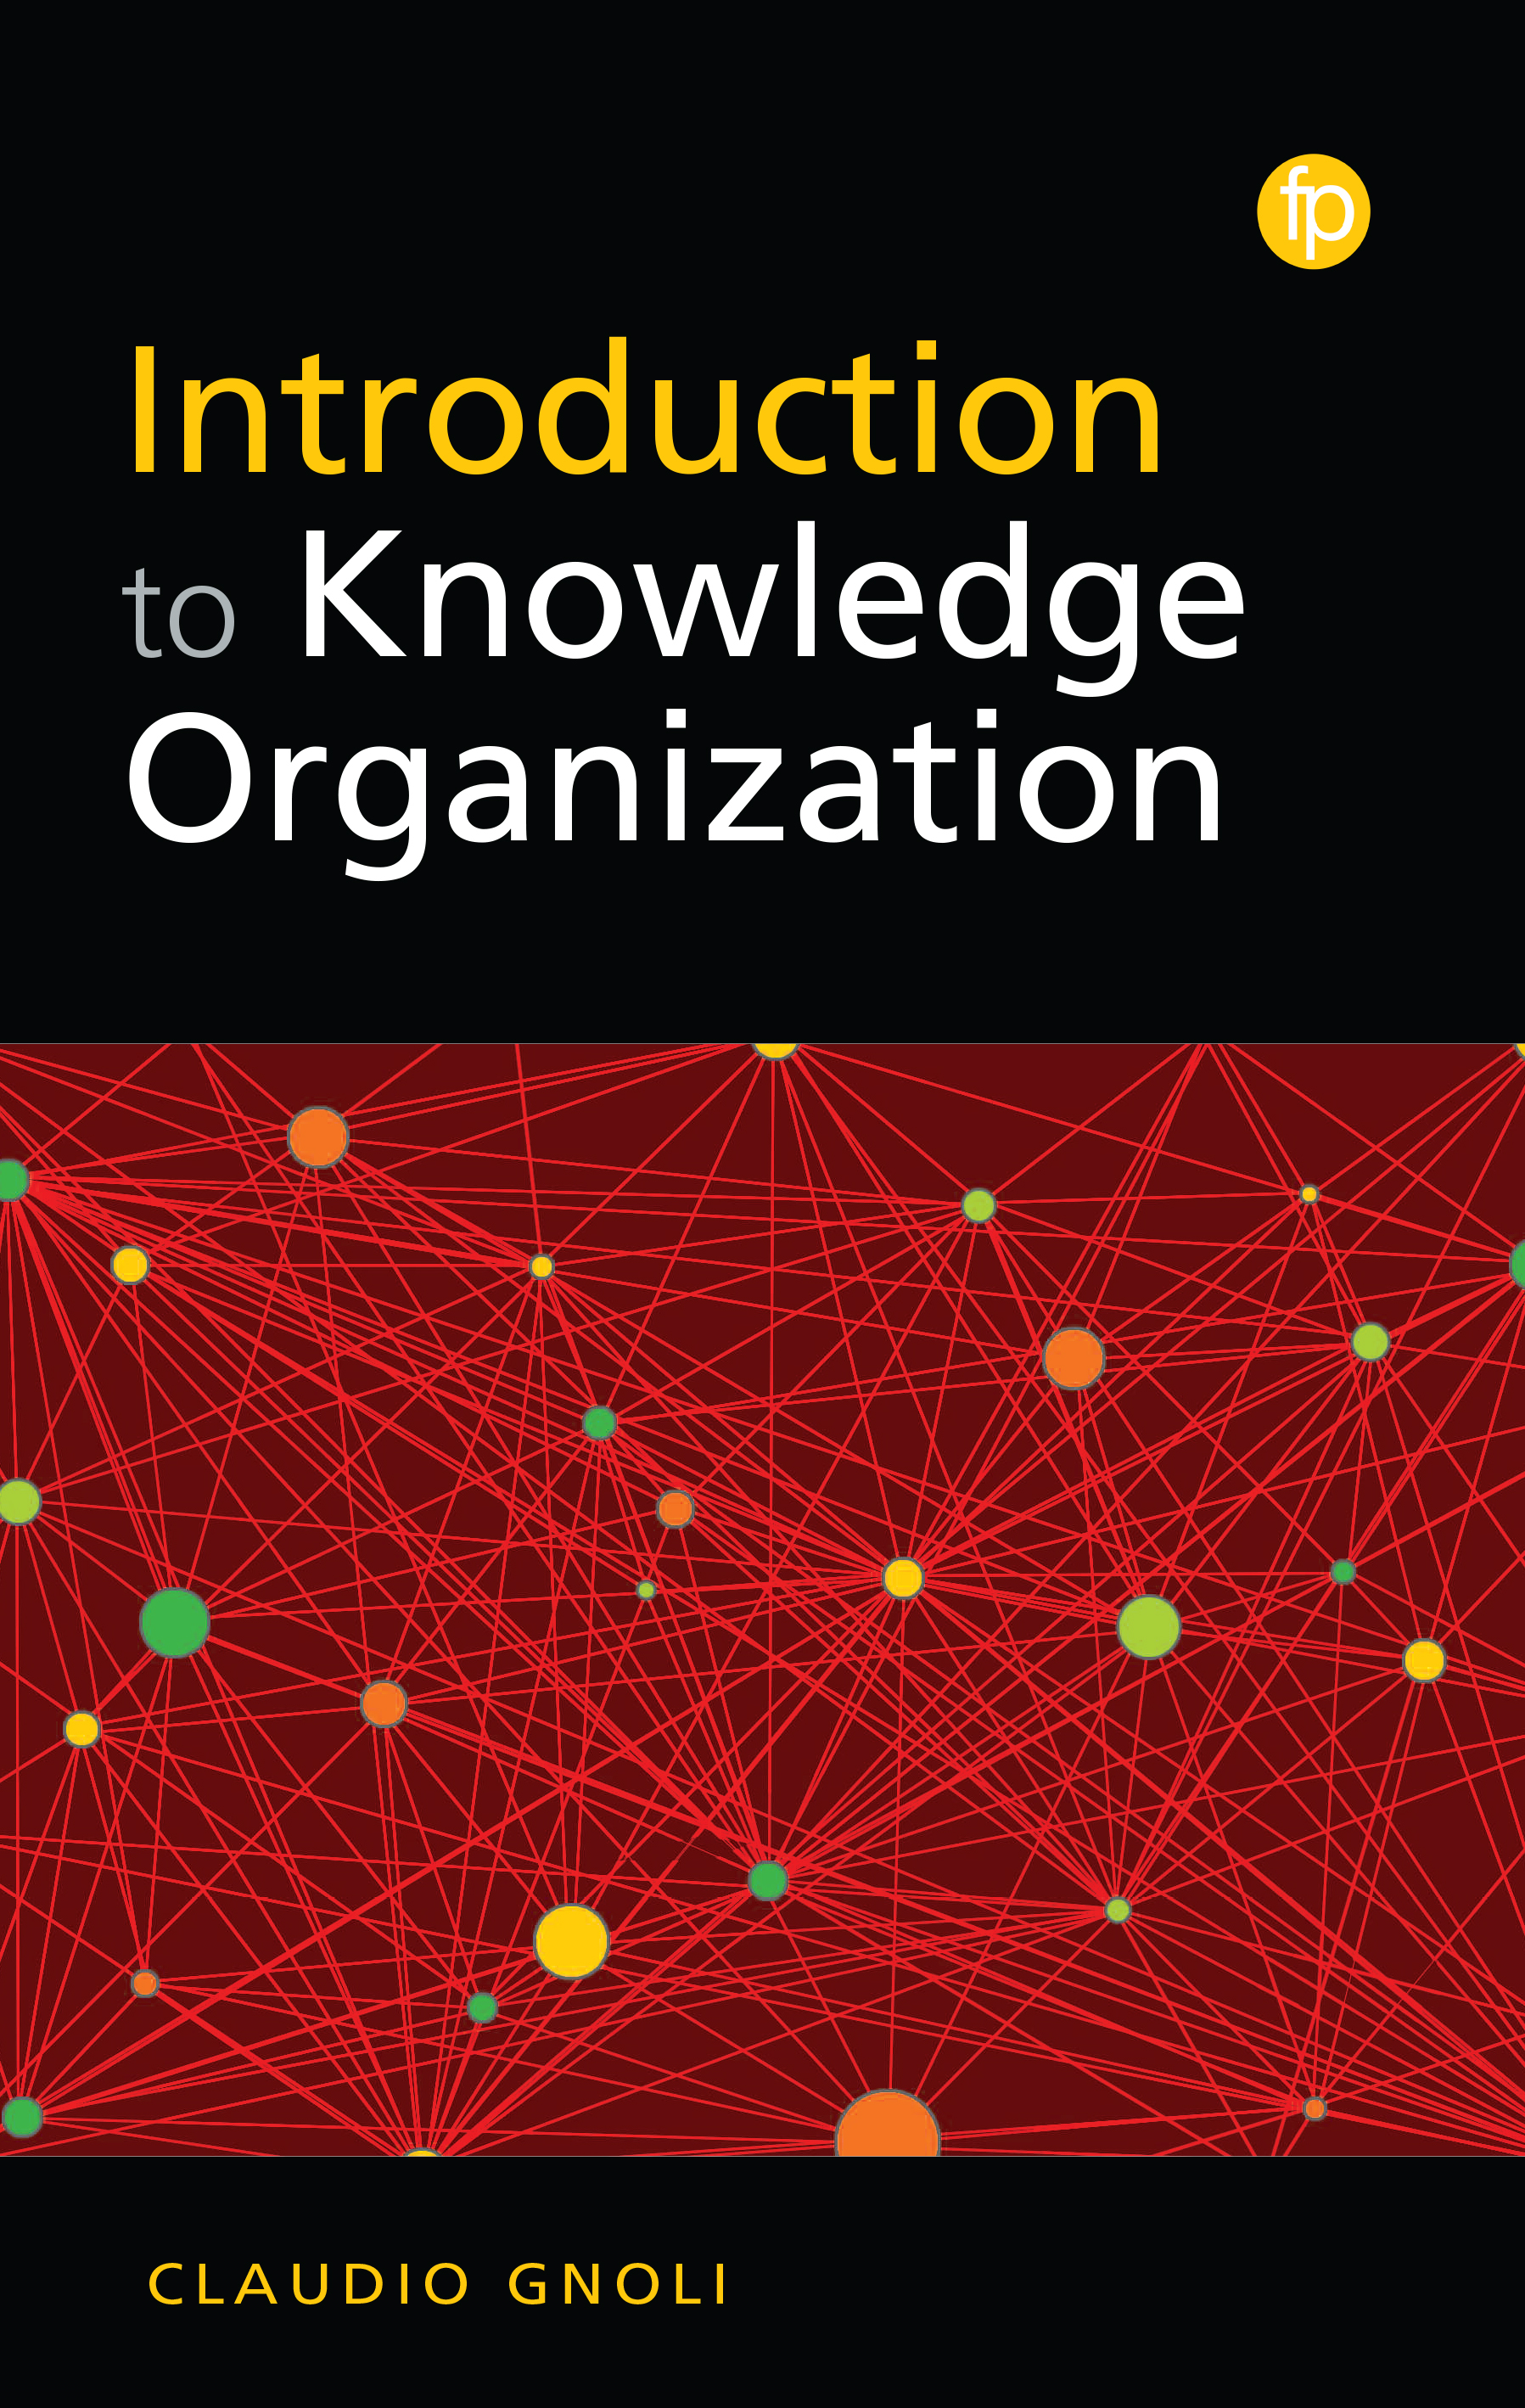 Introduction to Knowledge Organization